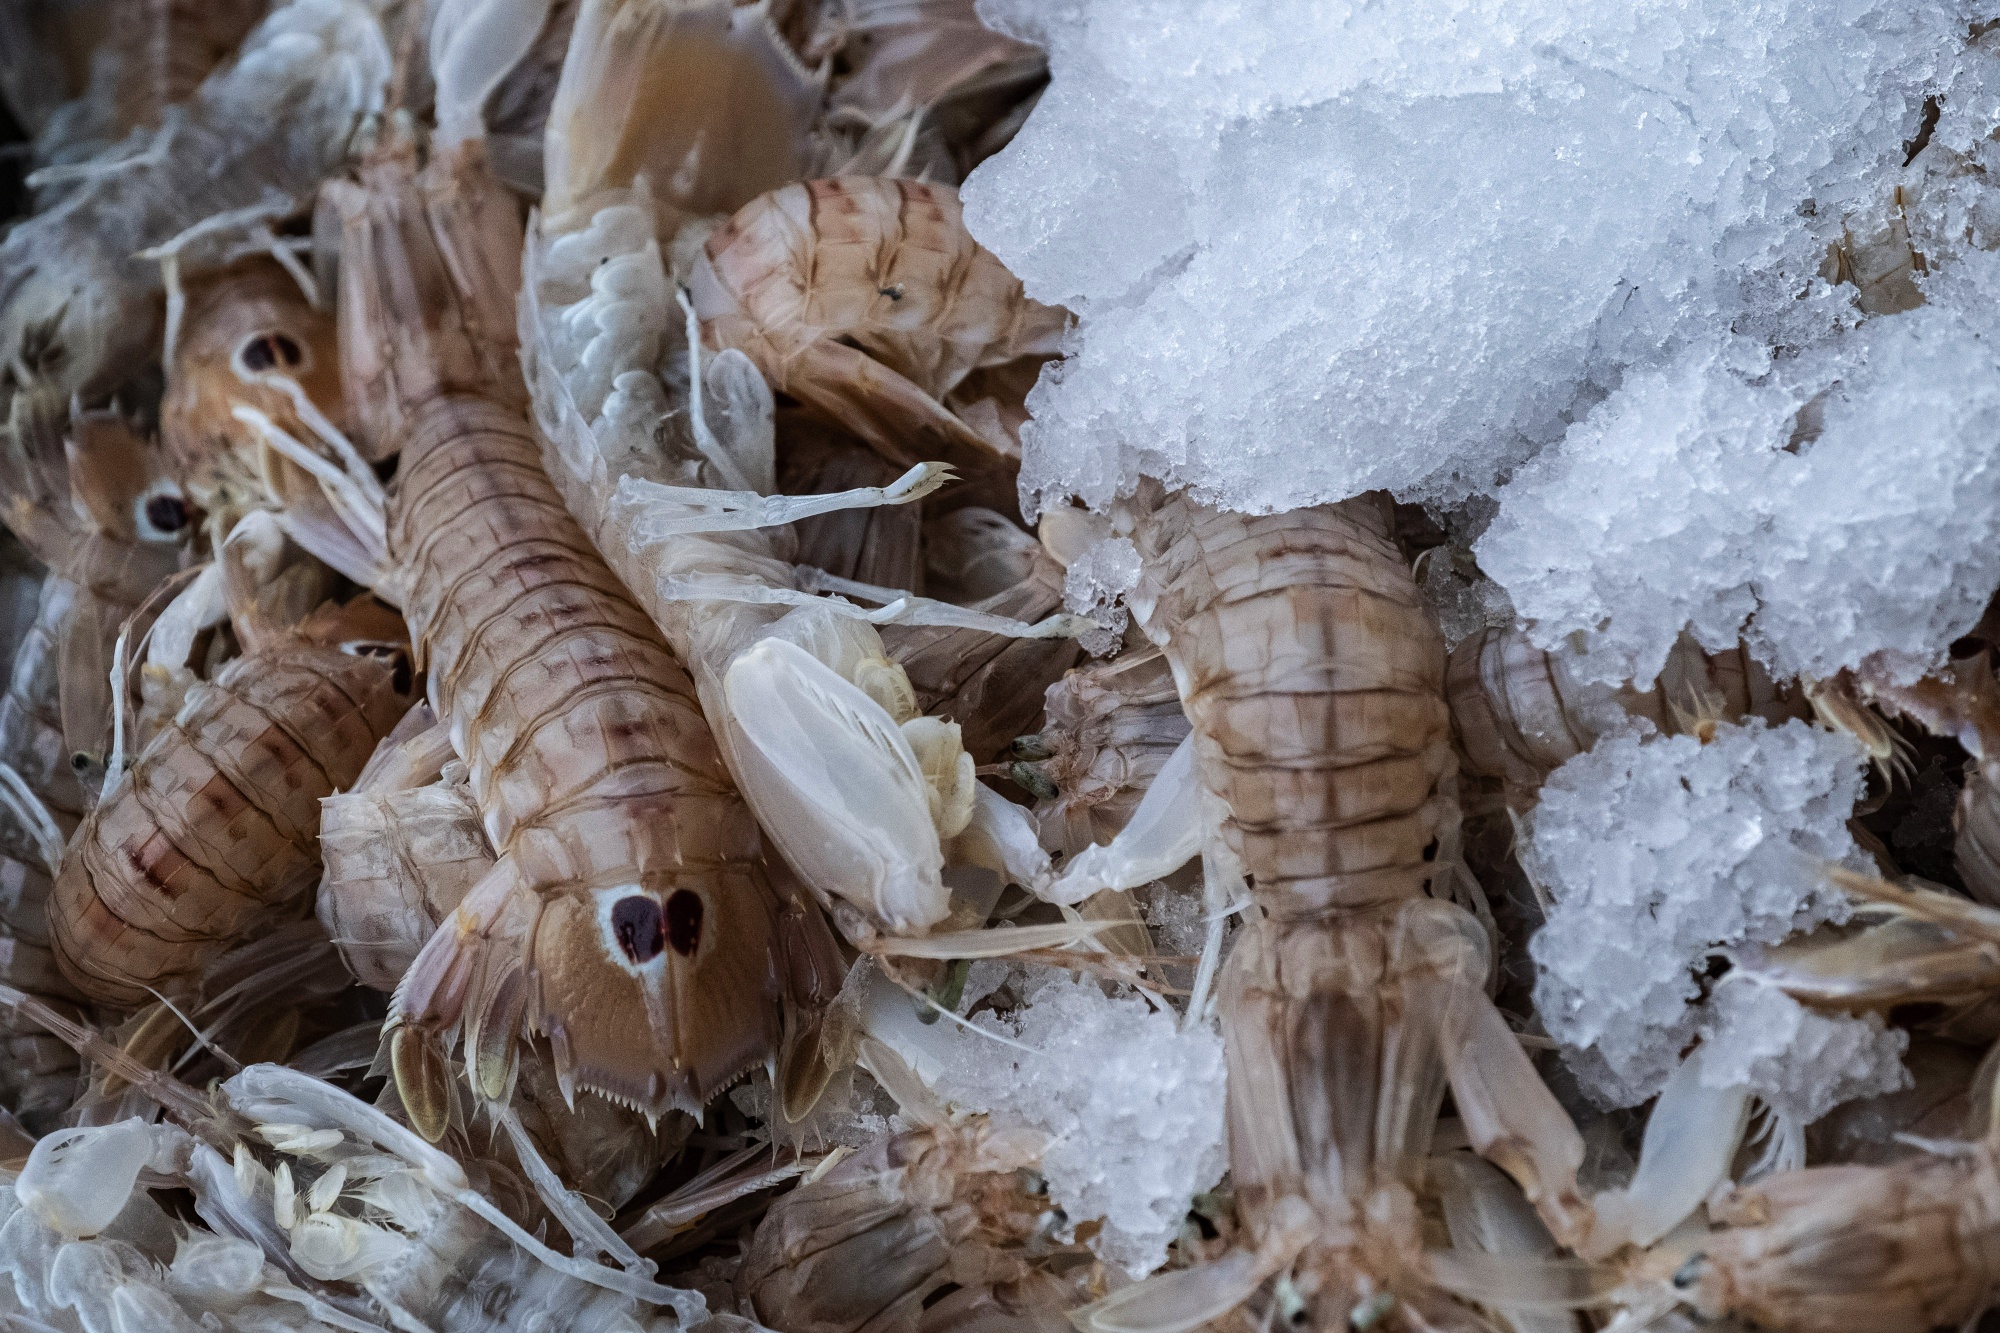 In August 2020, packaging of frozen shrimp brought in from Ecuador tested positive for&nbsp;coronavirus.